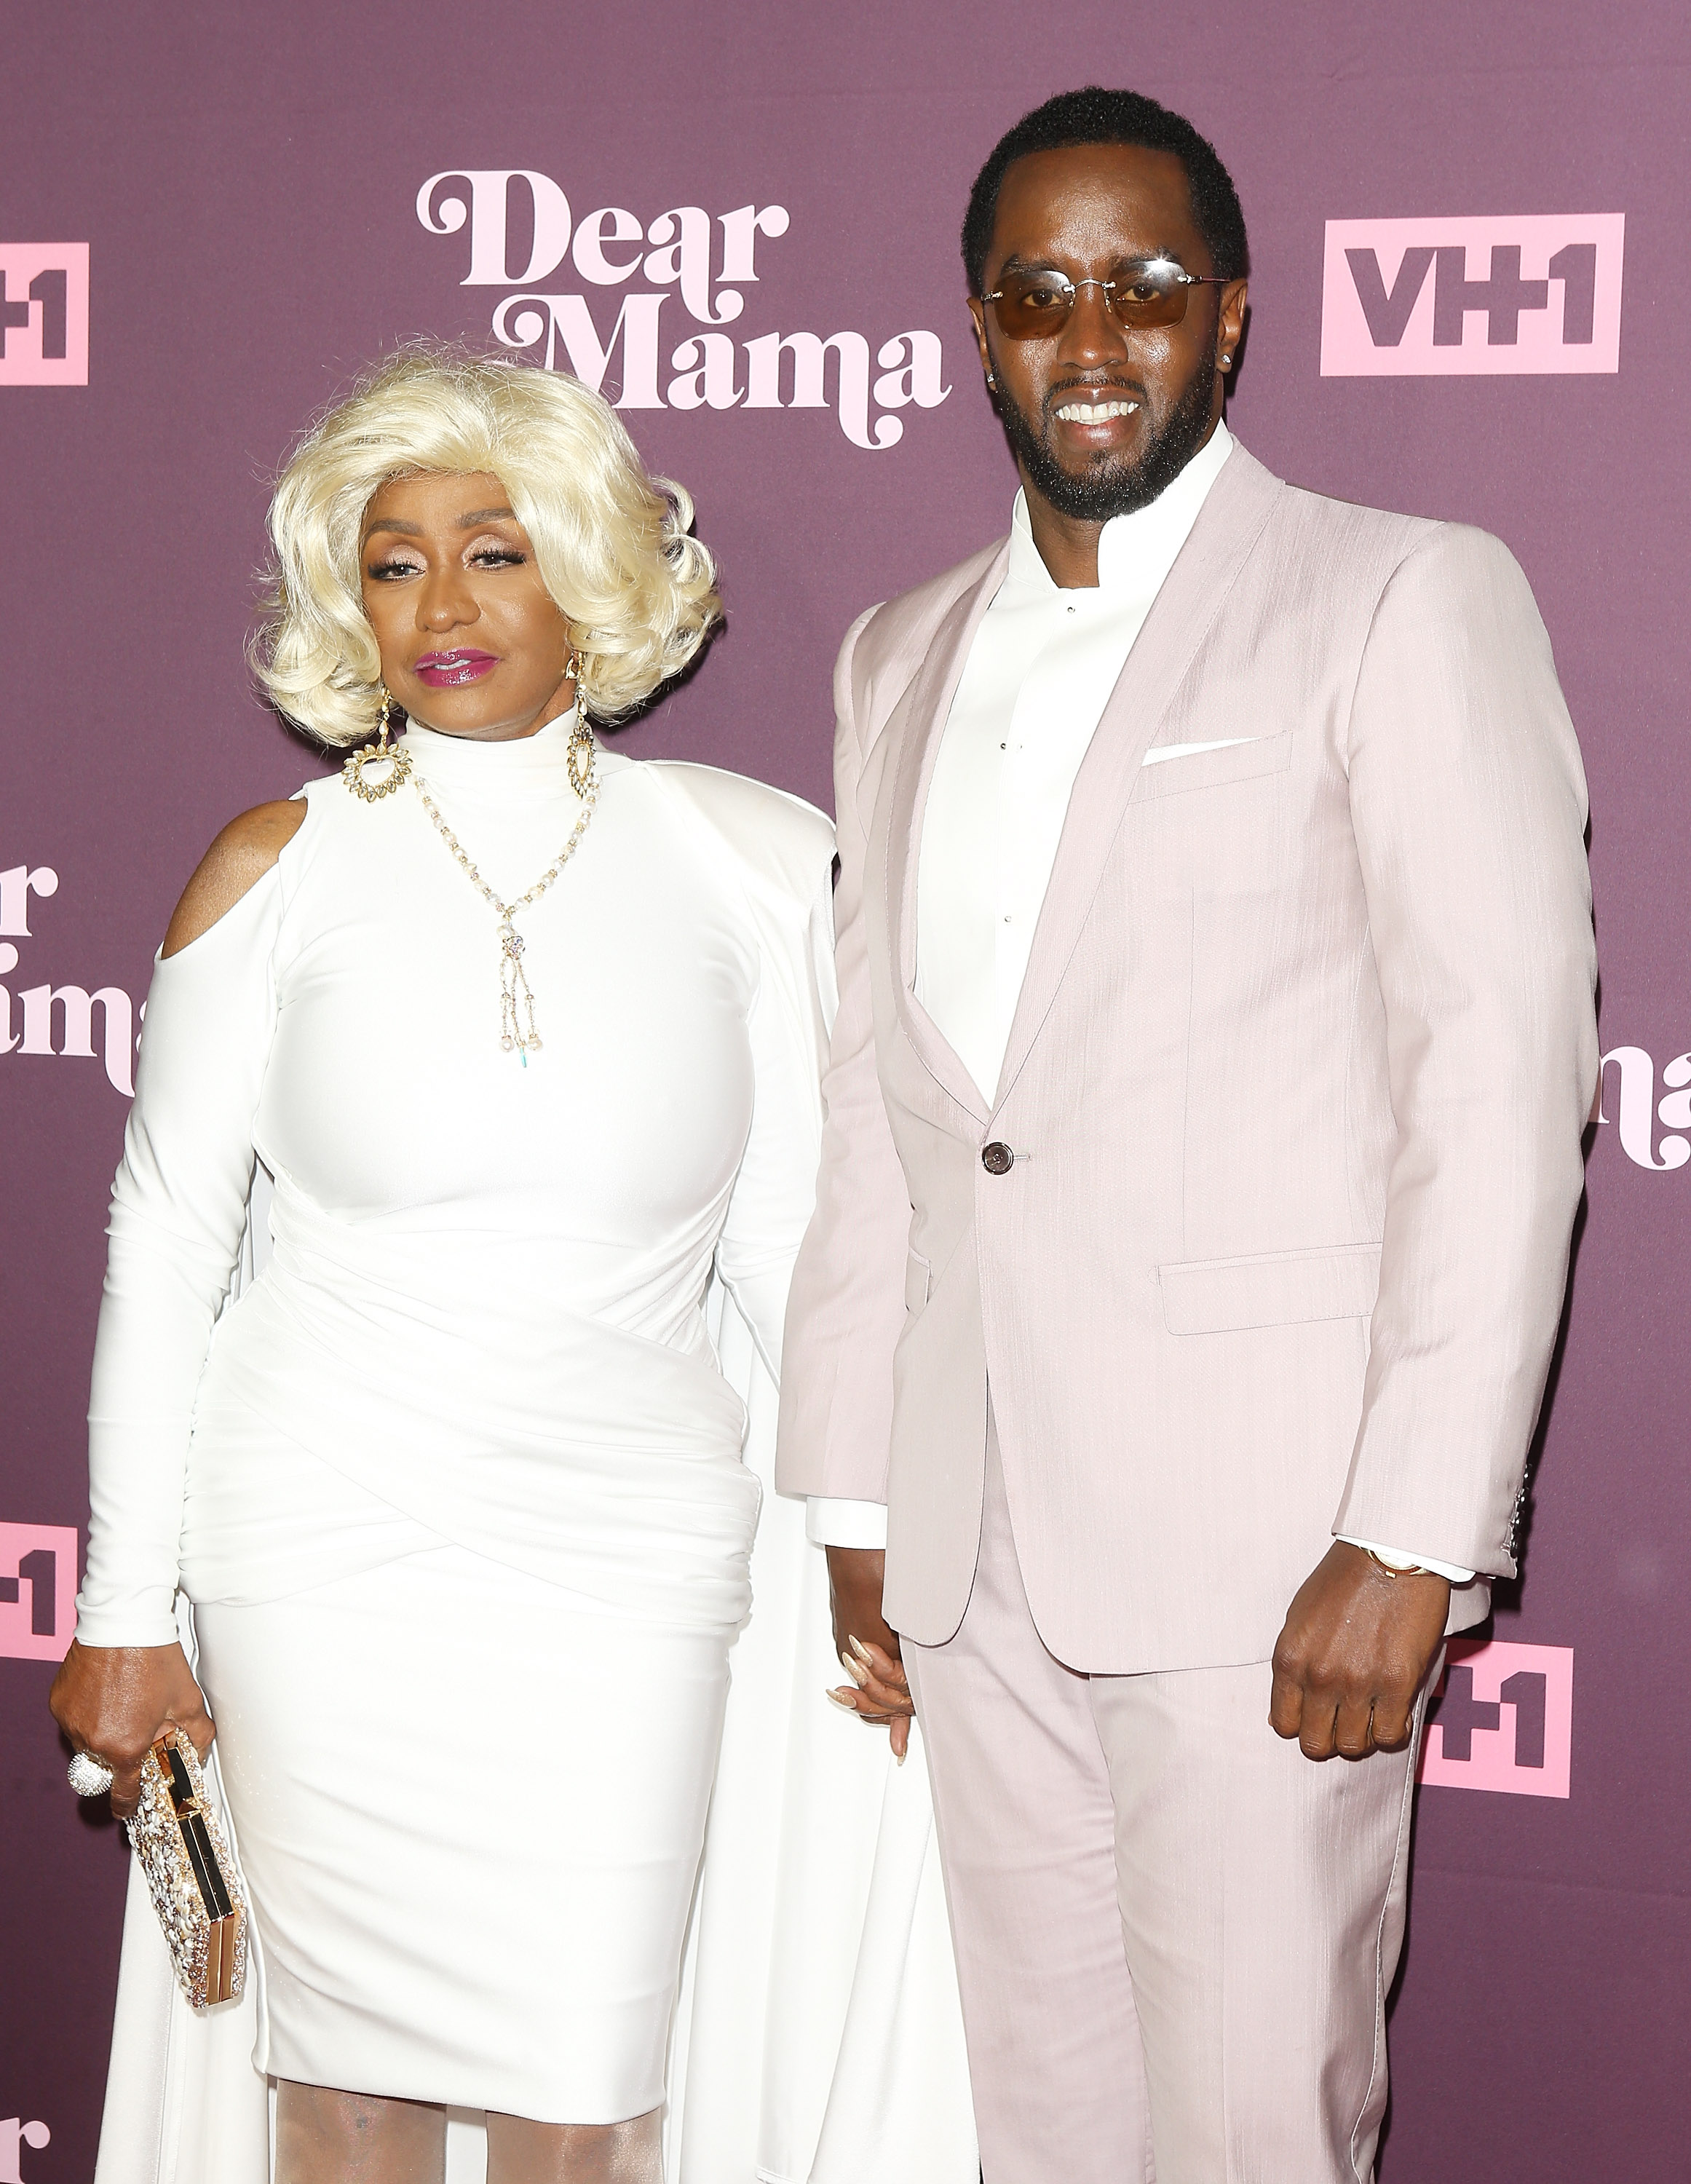 Sean Combs (R) and his mom, Janice Combs at Ace Hotel on May 3, 2018, in Los Angeles, California. | Source: Getty Images